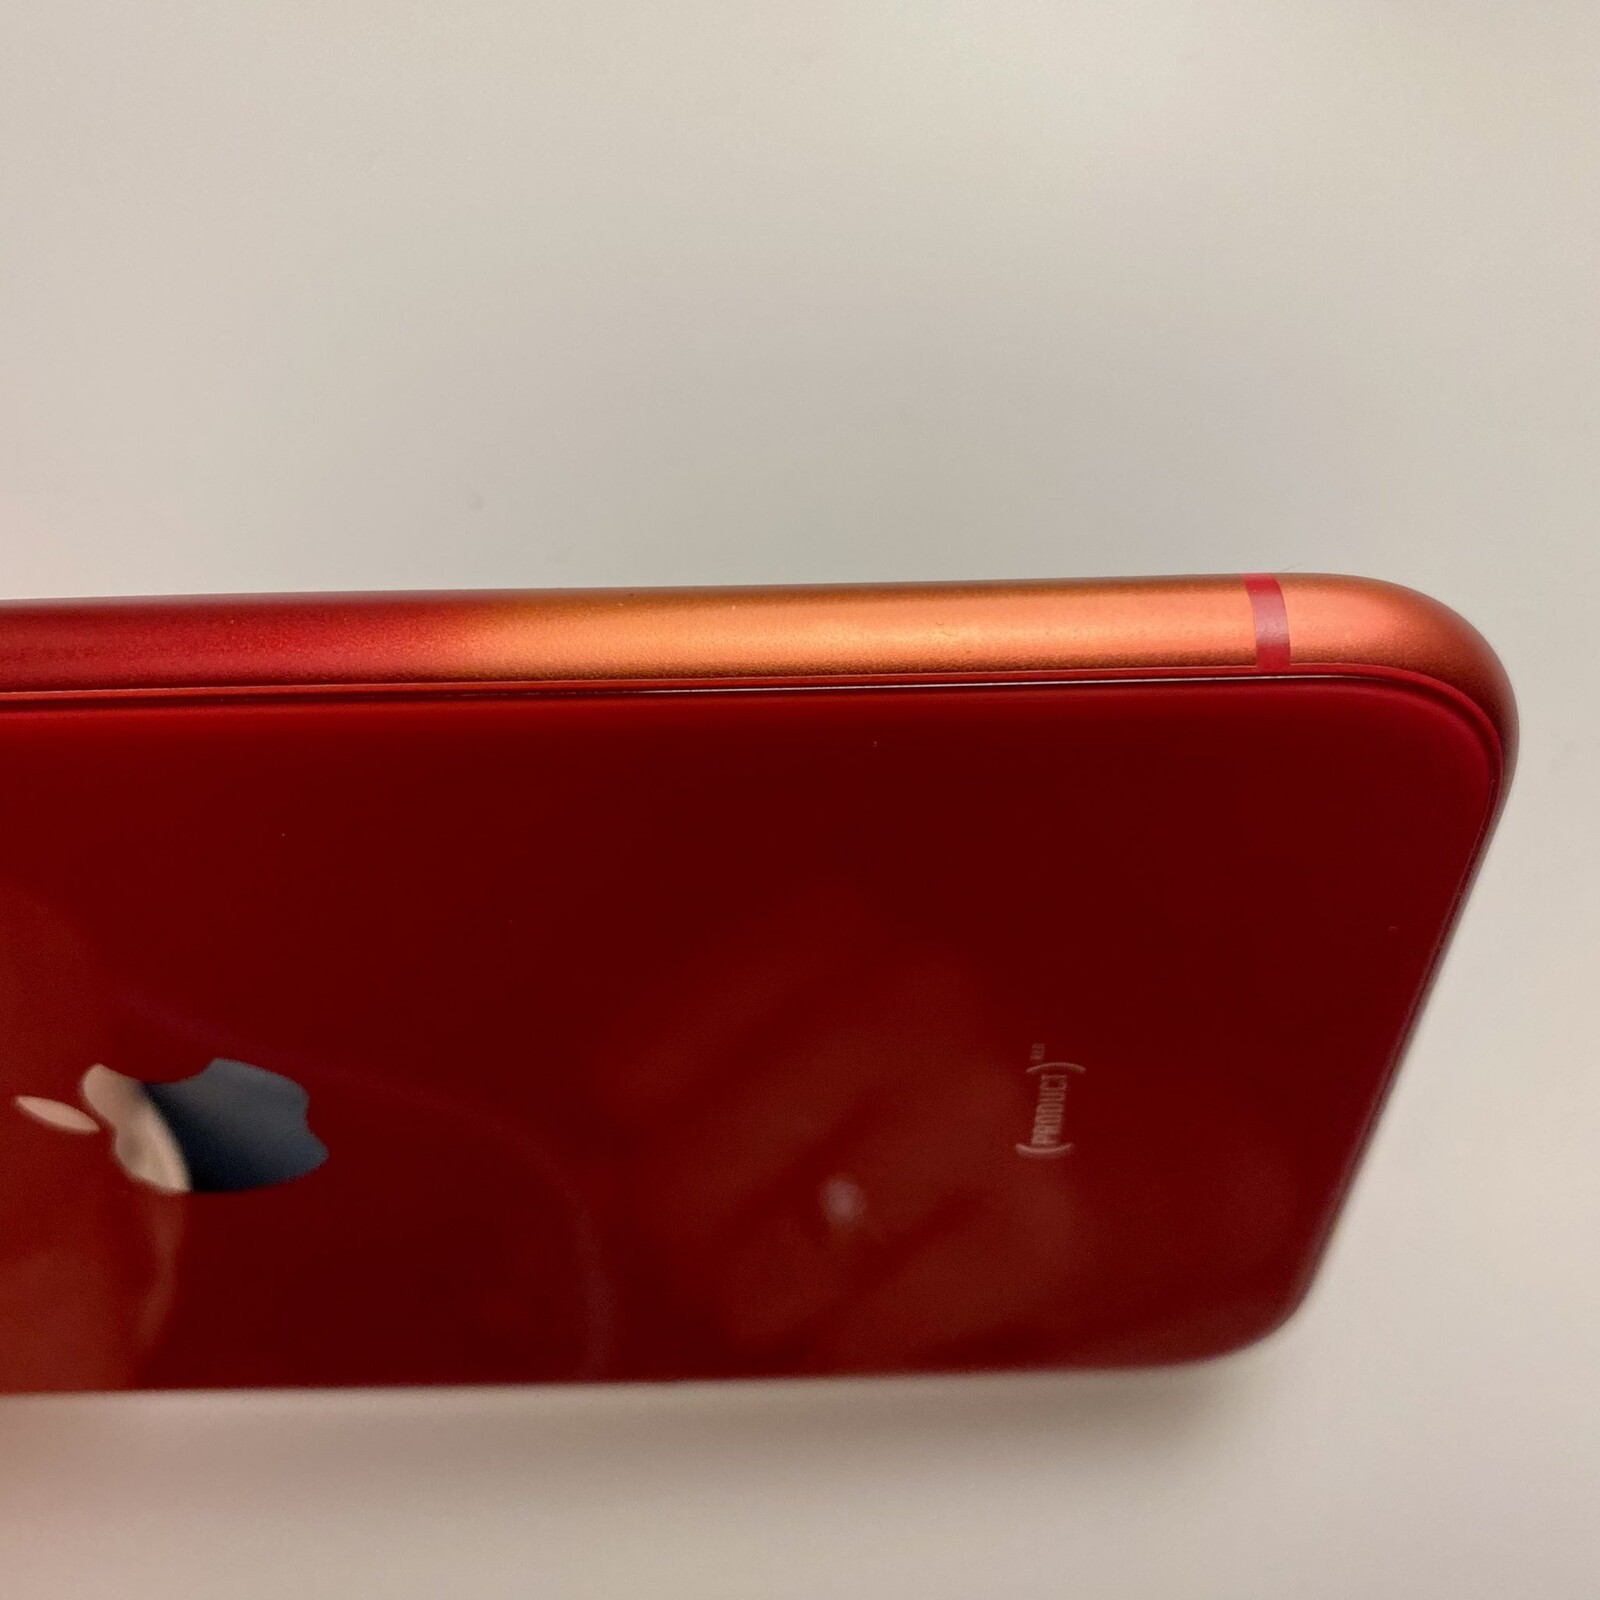 Some Iphone 11 And 12 Owners Complaining Of Color Fading Issues Other Red Iphone Models Could Be Among Those Affected Notebookcheck Net News